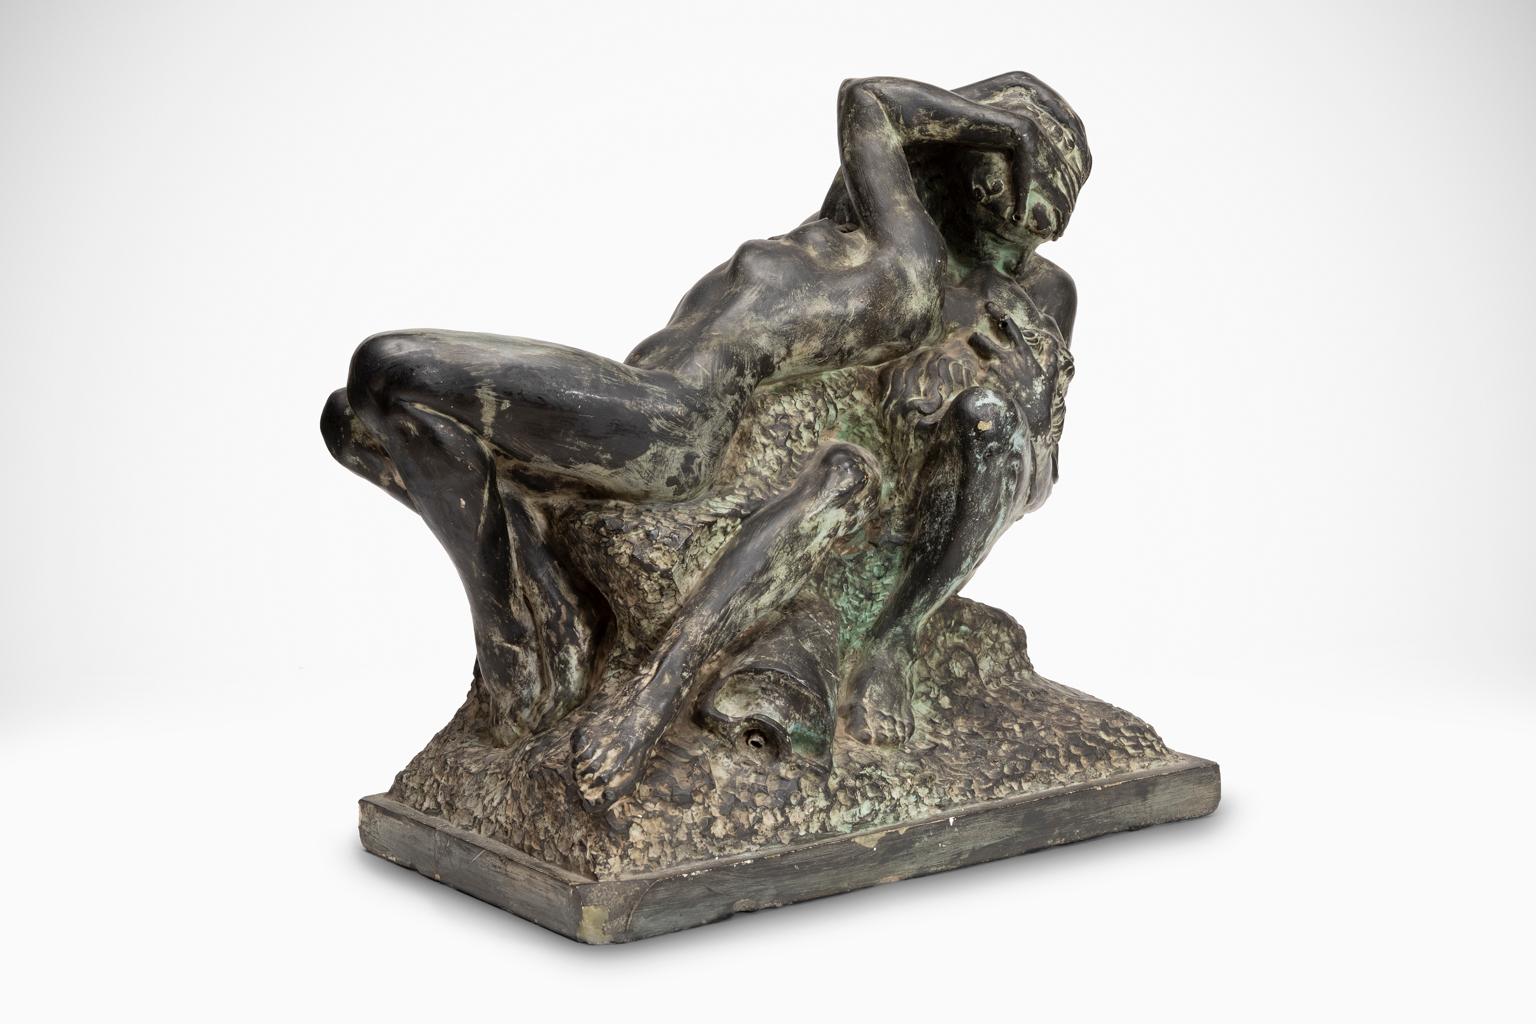 SALE ONE WEEK ONLY

Edgardo Simone (Italian/American, 1890-1948) The Kiss patinated plaster casting sculpture for kissing nudes fountain sculpture signed to top of base. 

Classically trained in Italy at the Beaux Arts Academy in Rome from 1906 to